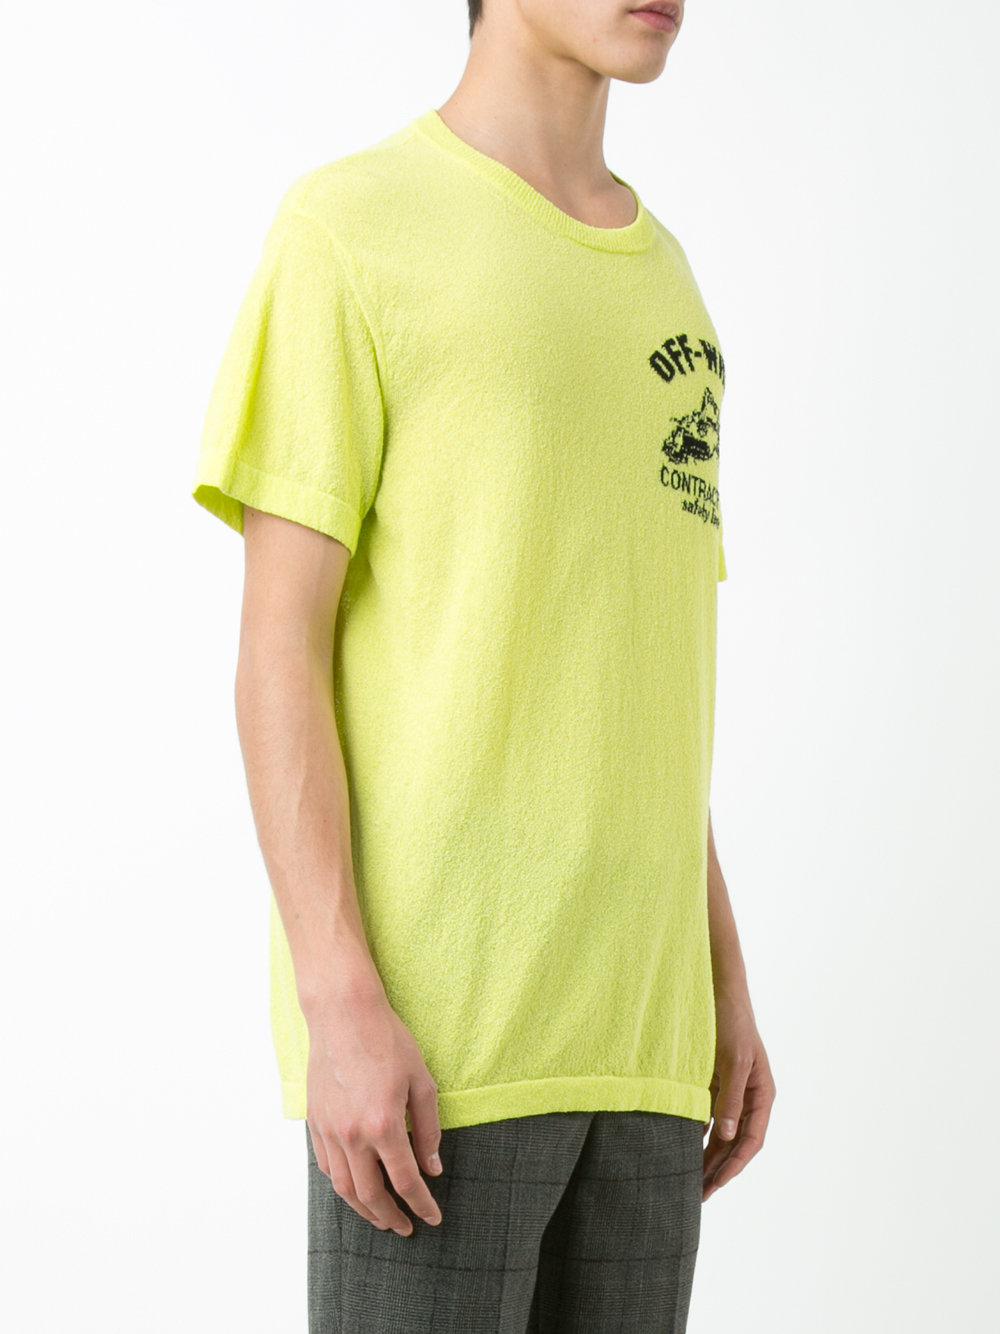 Off-White c/o Virgil Cotton Construction T-shirt in Green for Men - Lyst